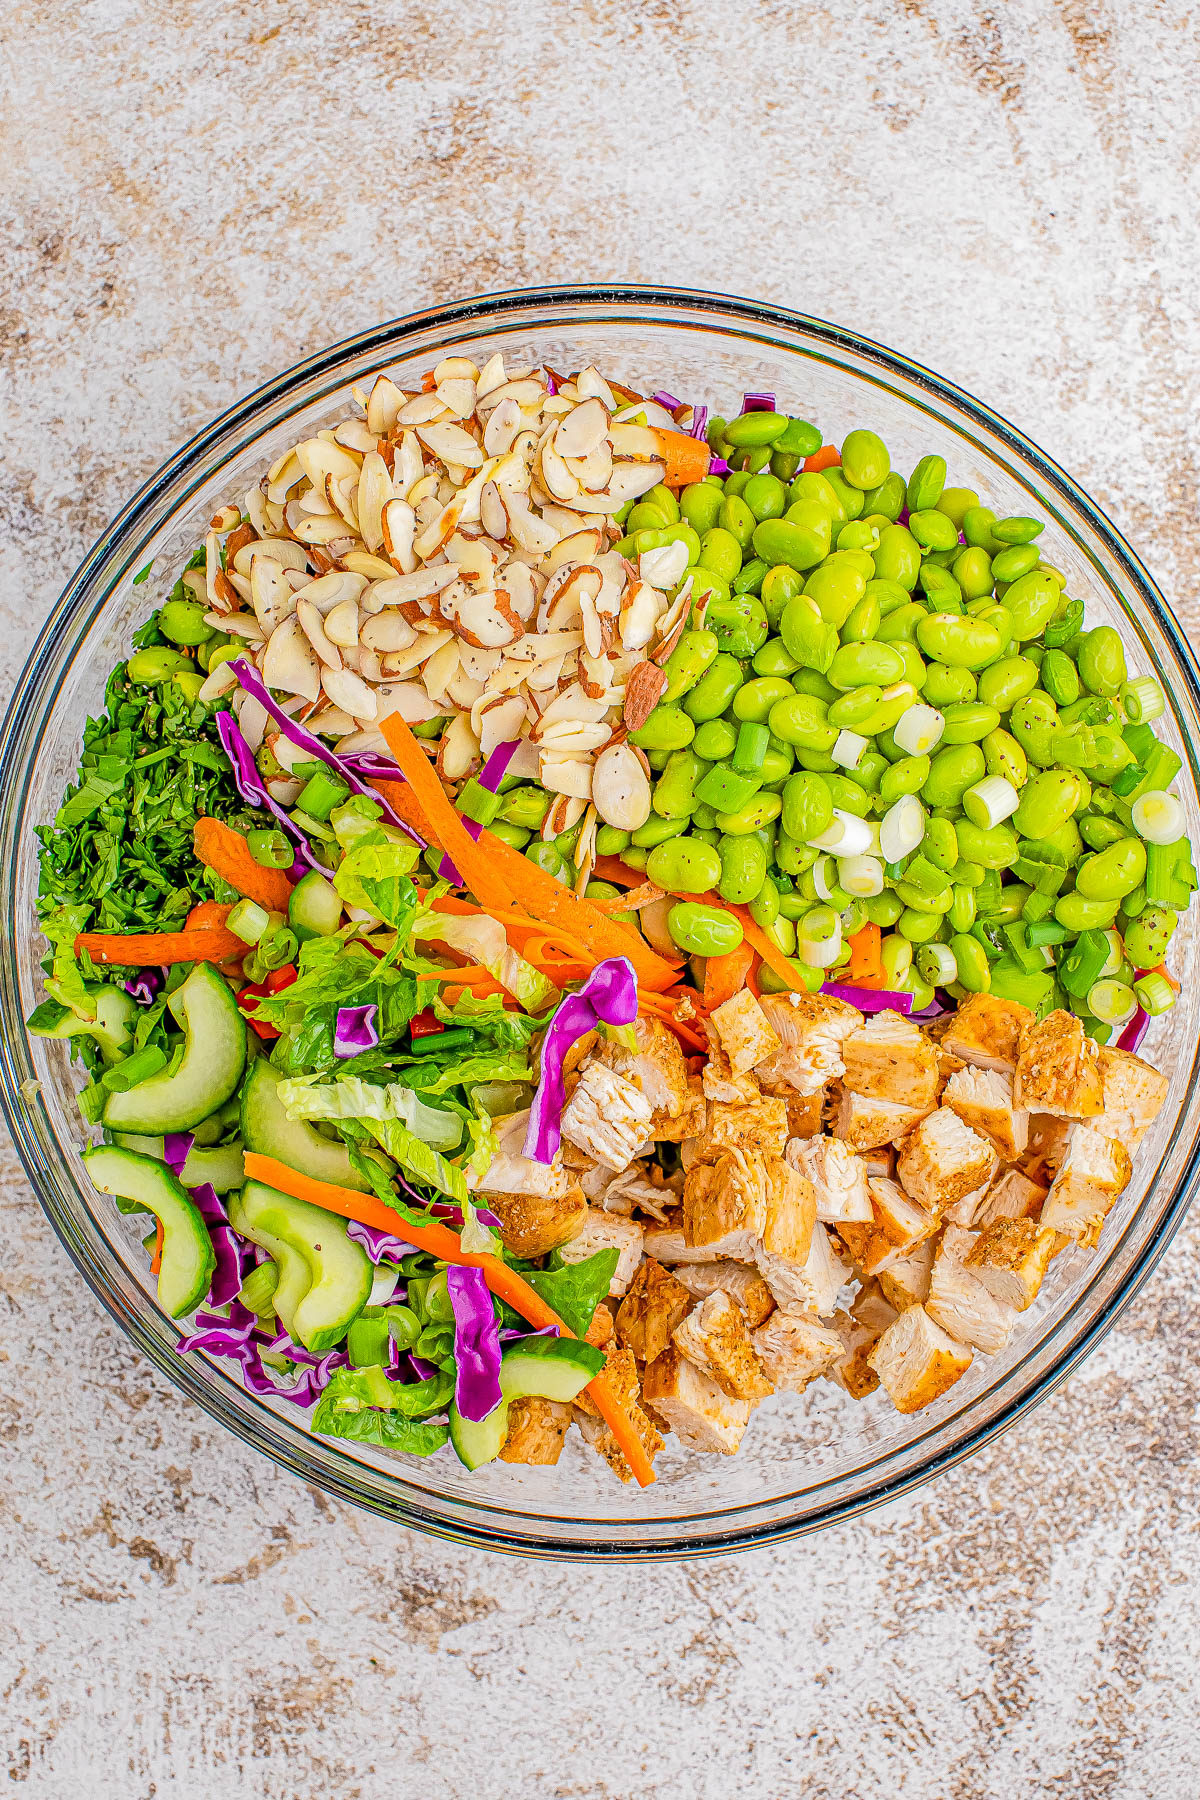 A glass bowl filled with a colorful salad consisting of sliced almonds, edamame, chopped cooked chicken, cucumber, red cabbage, carrots, and mixed greens.